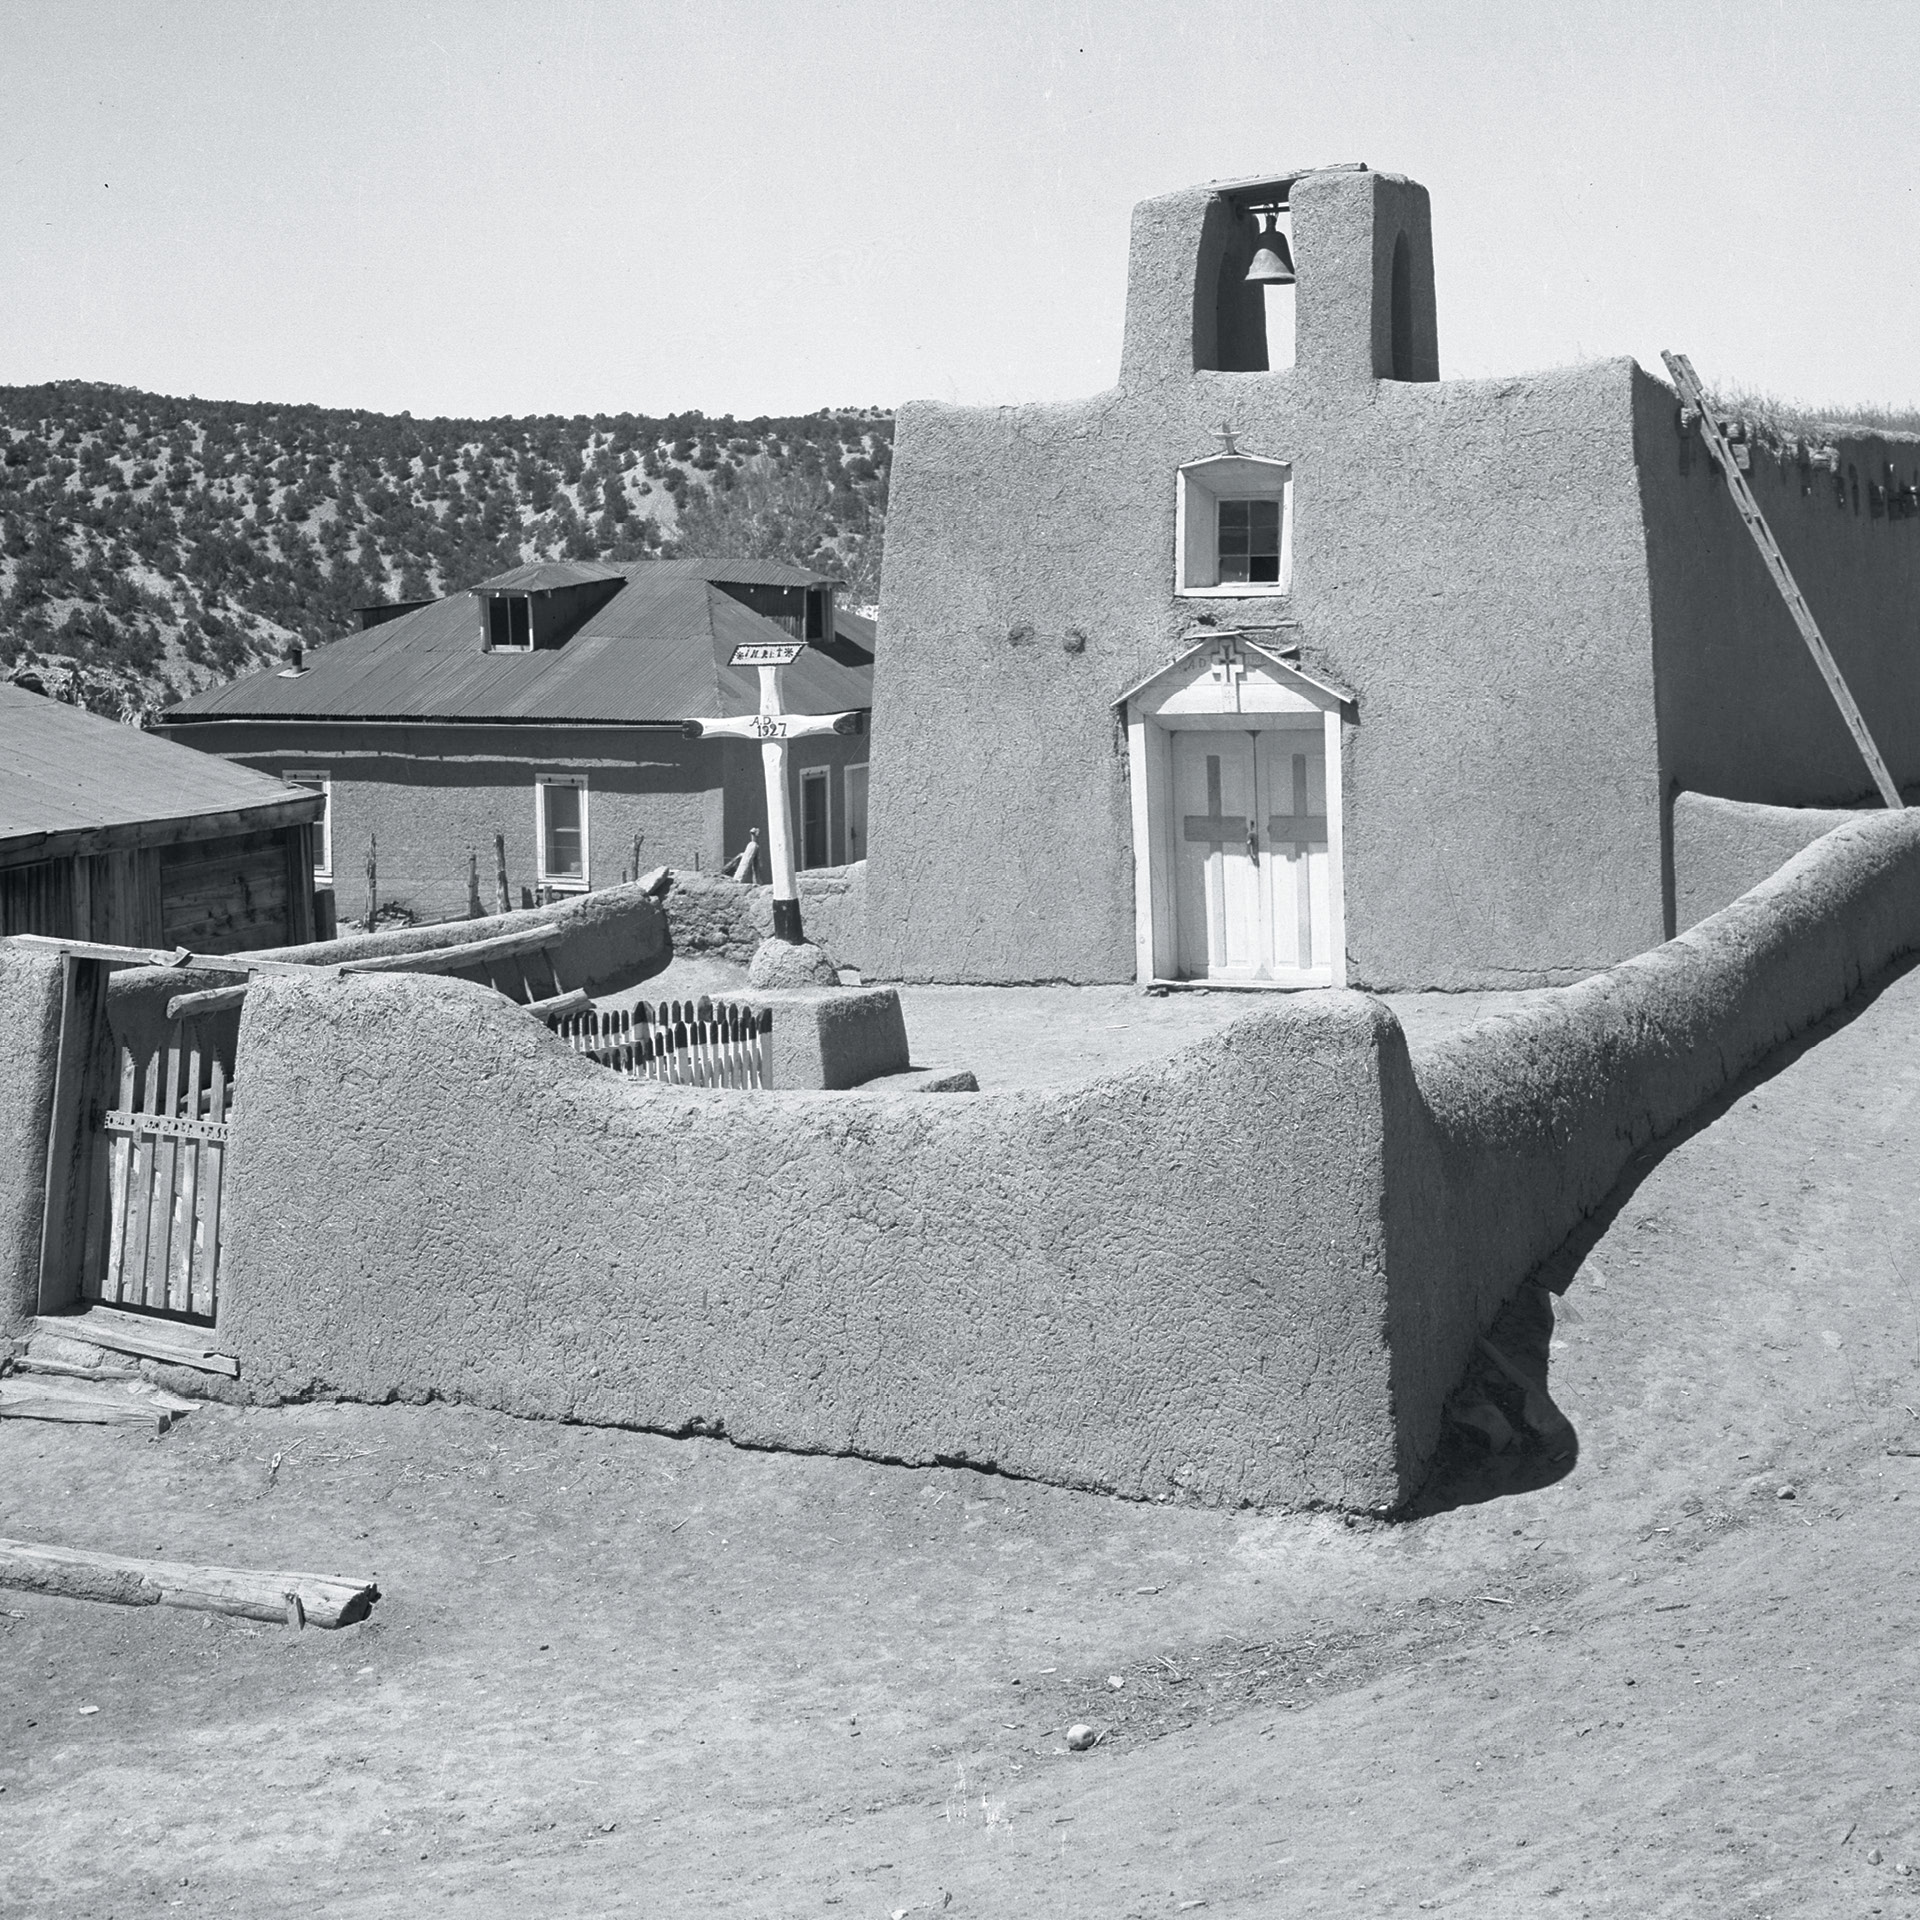 Image of old adobe mission church in New Mexico